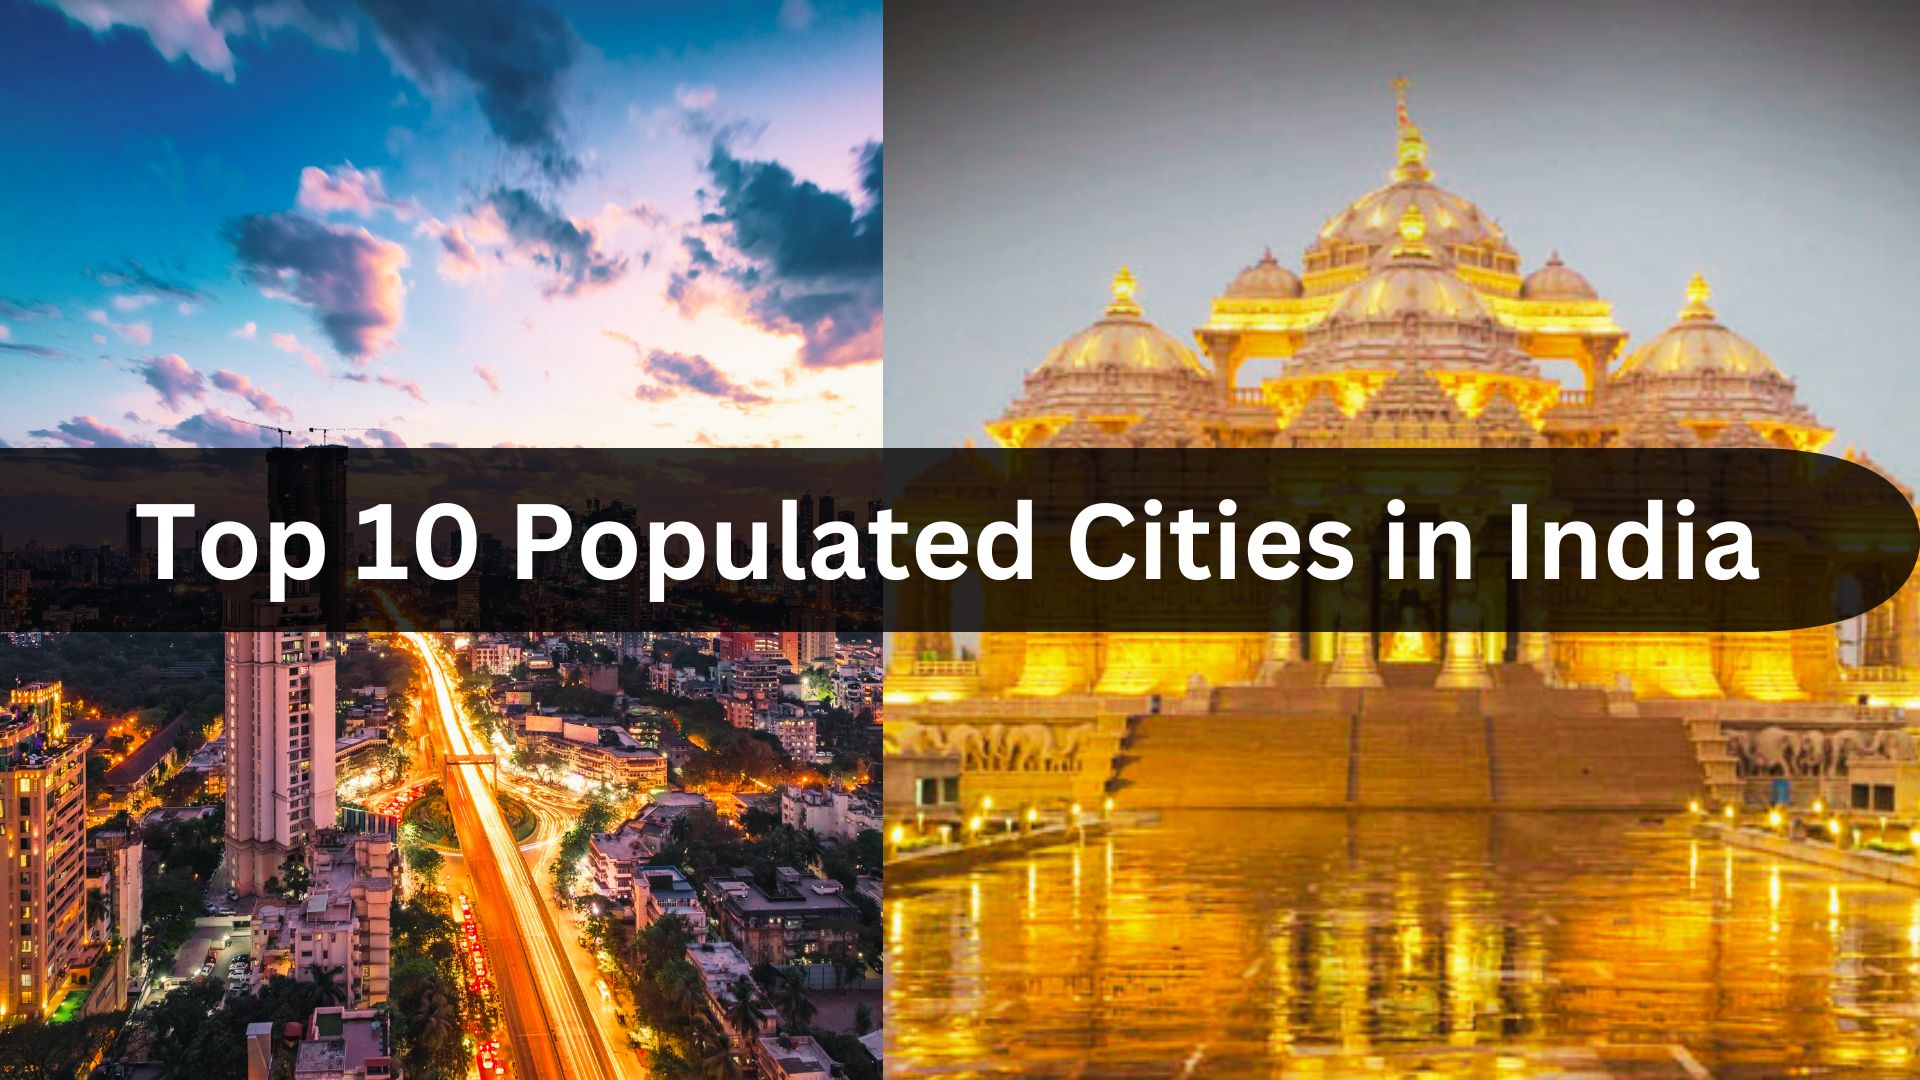 Top 10 Populated Cities in India